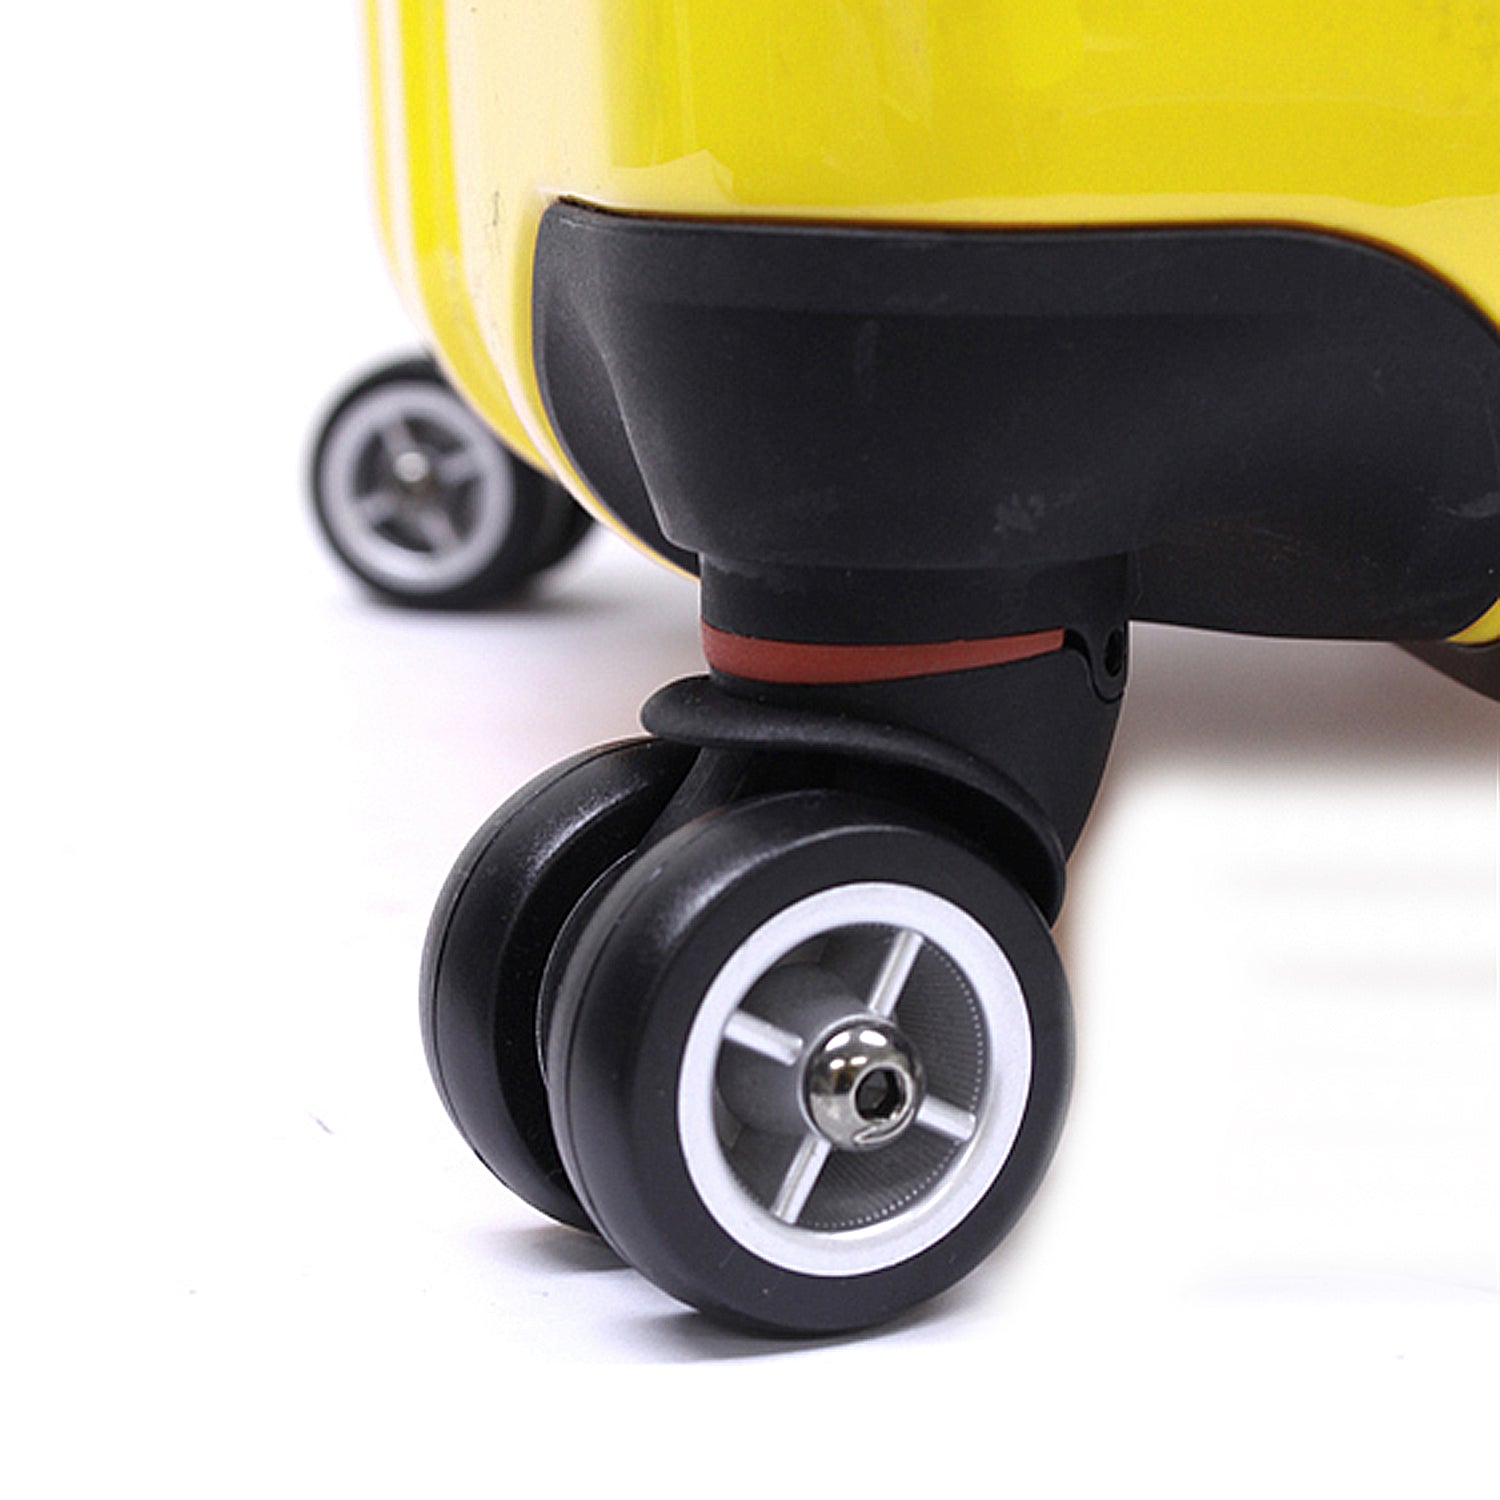 An image of a yellow luggage with black wheels.